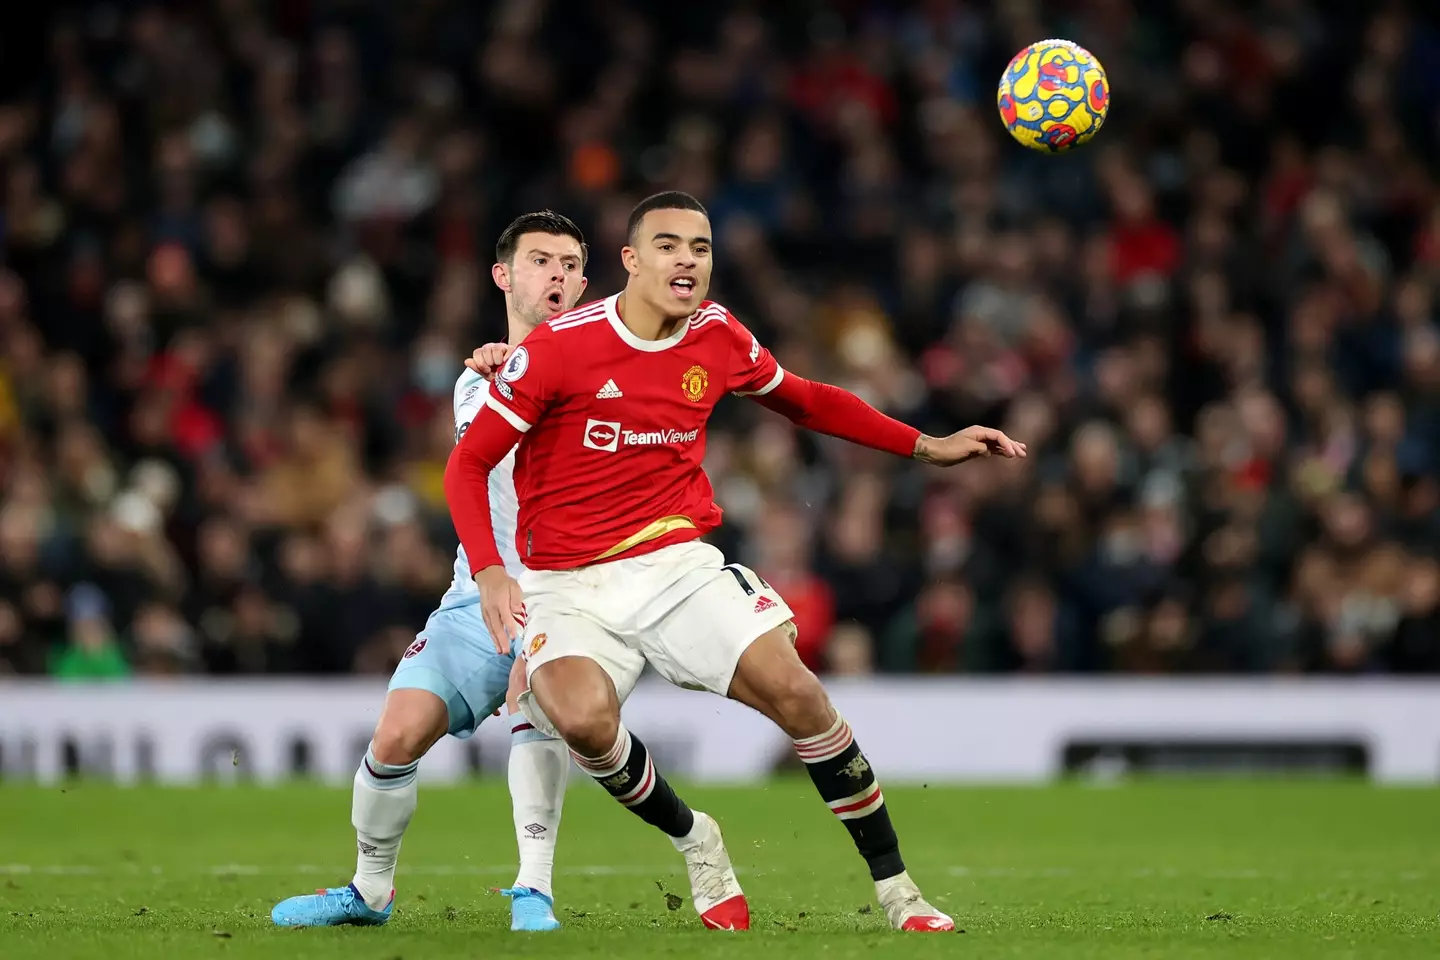 Mason Greenwood in action for Manchester United.